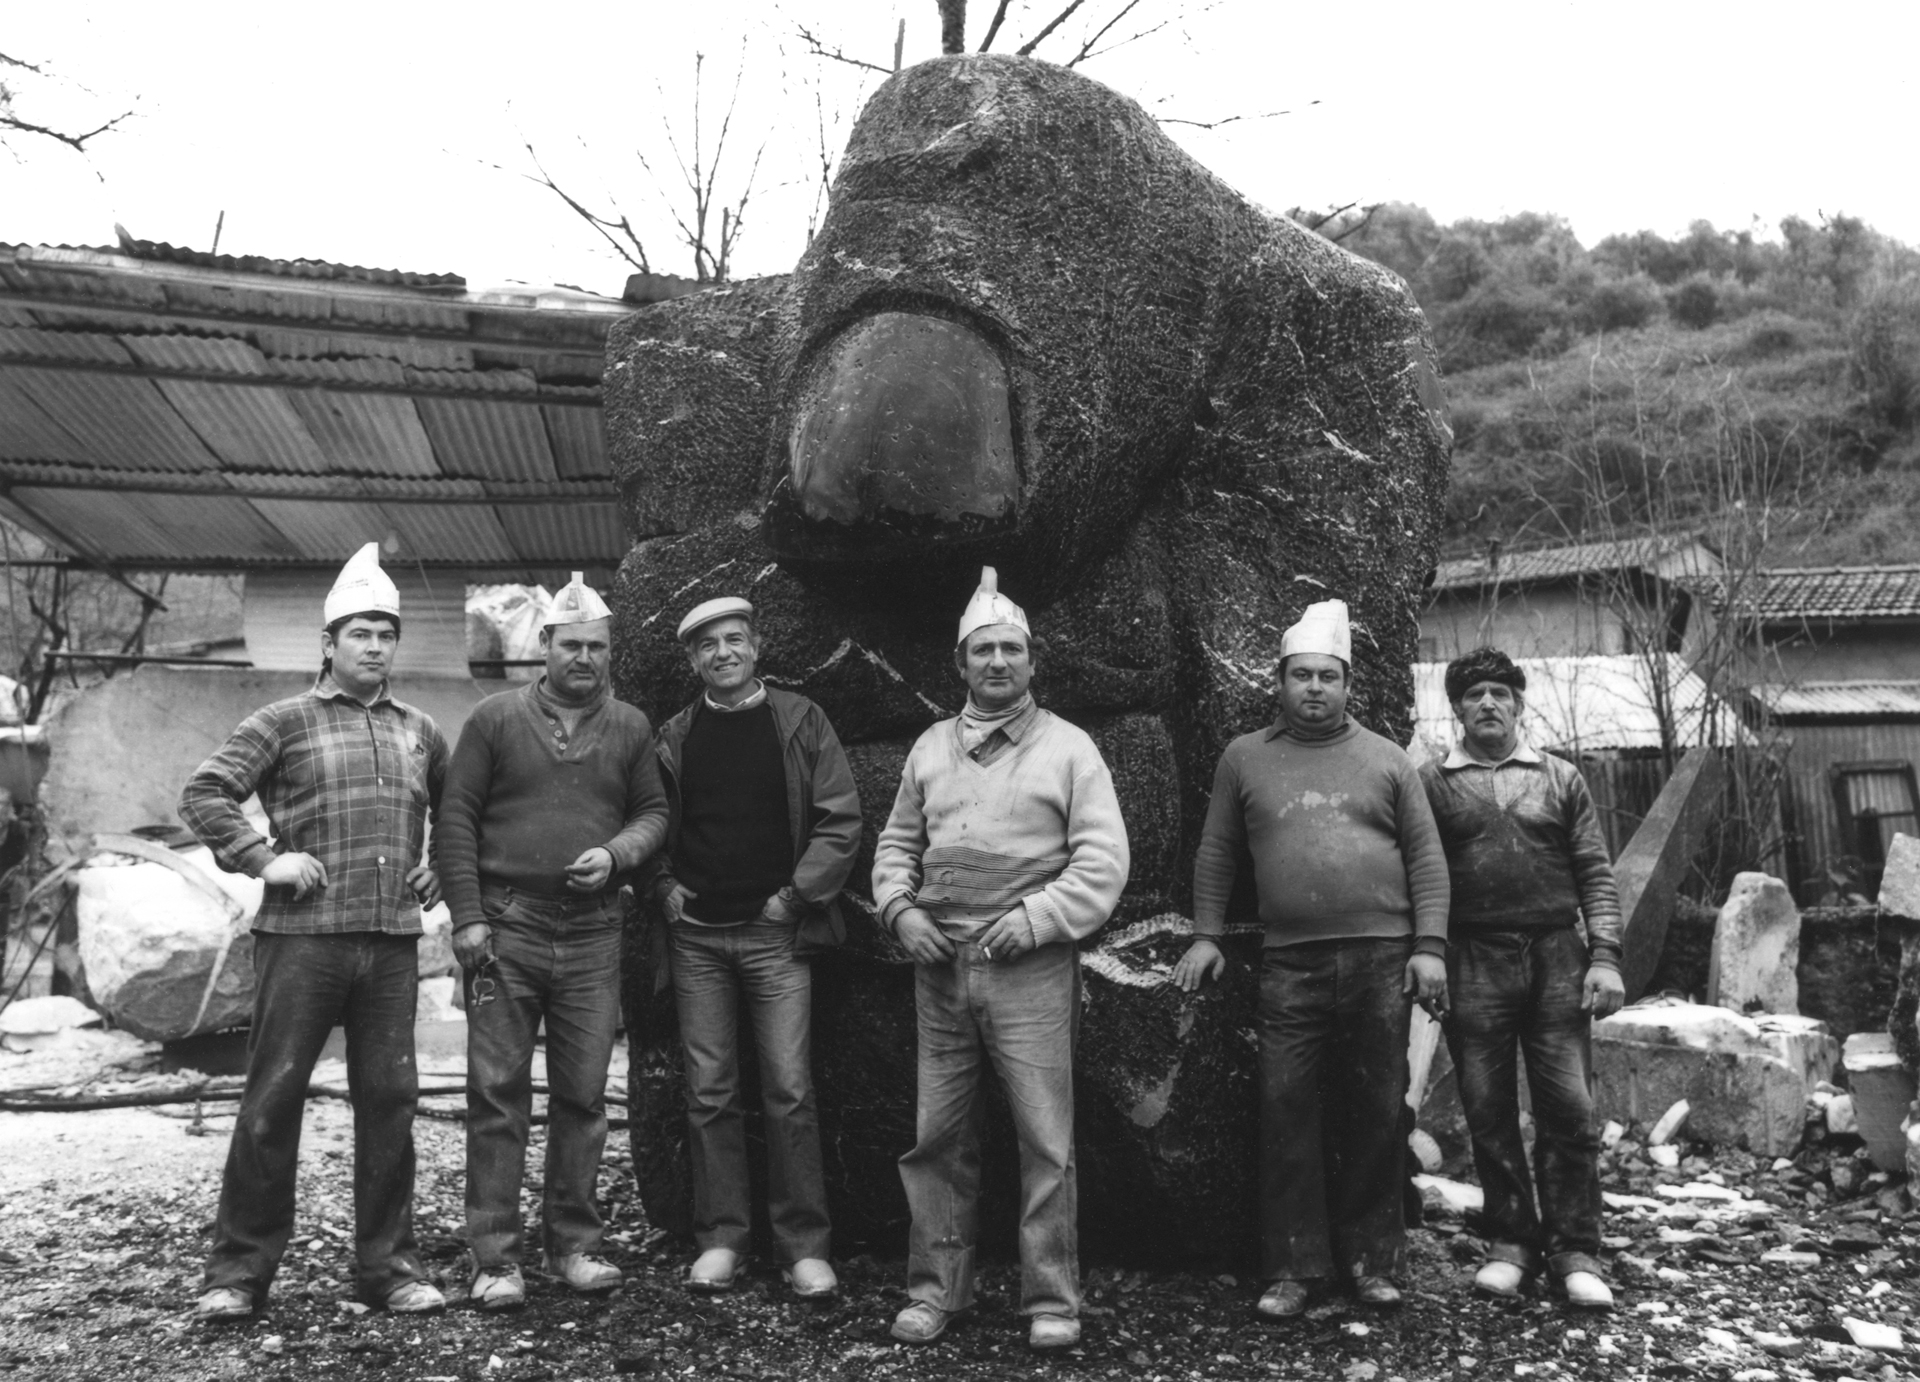 You can see a black and white photograph showing the artist Bruno Martinazzi with five stonemasons. The group is standing in front of the sculpture "Die 2 Krfäte", which shows a clenched fist.